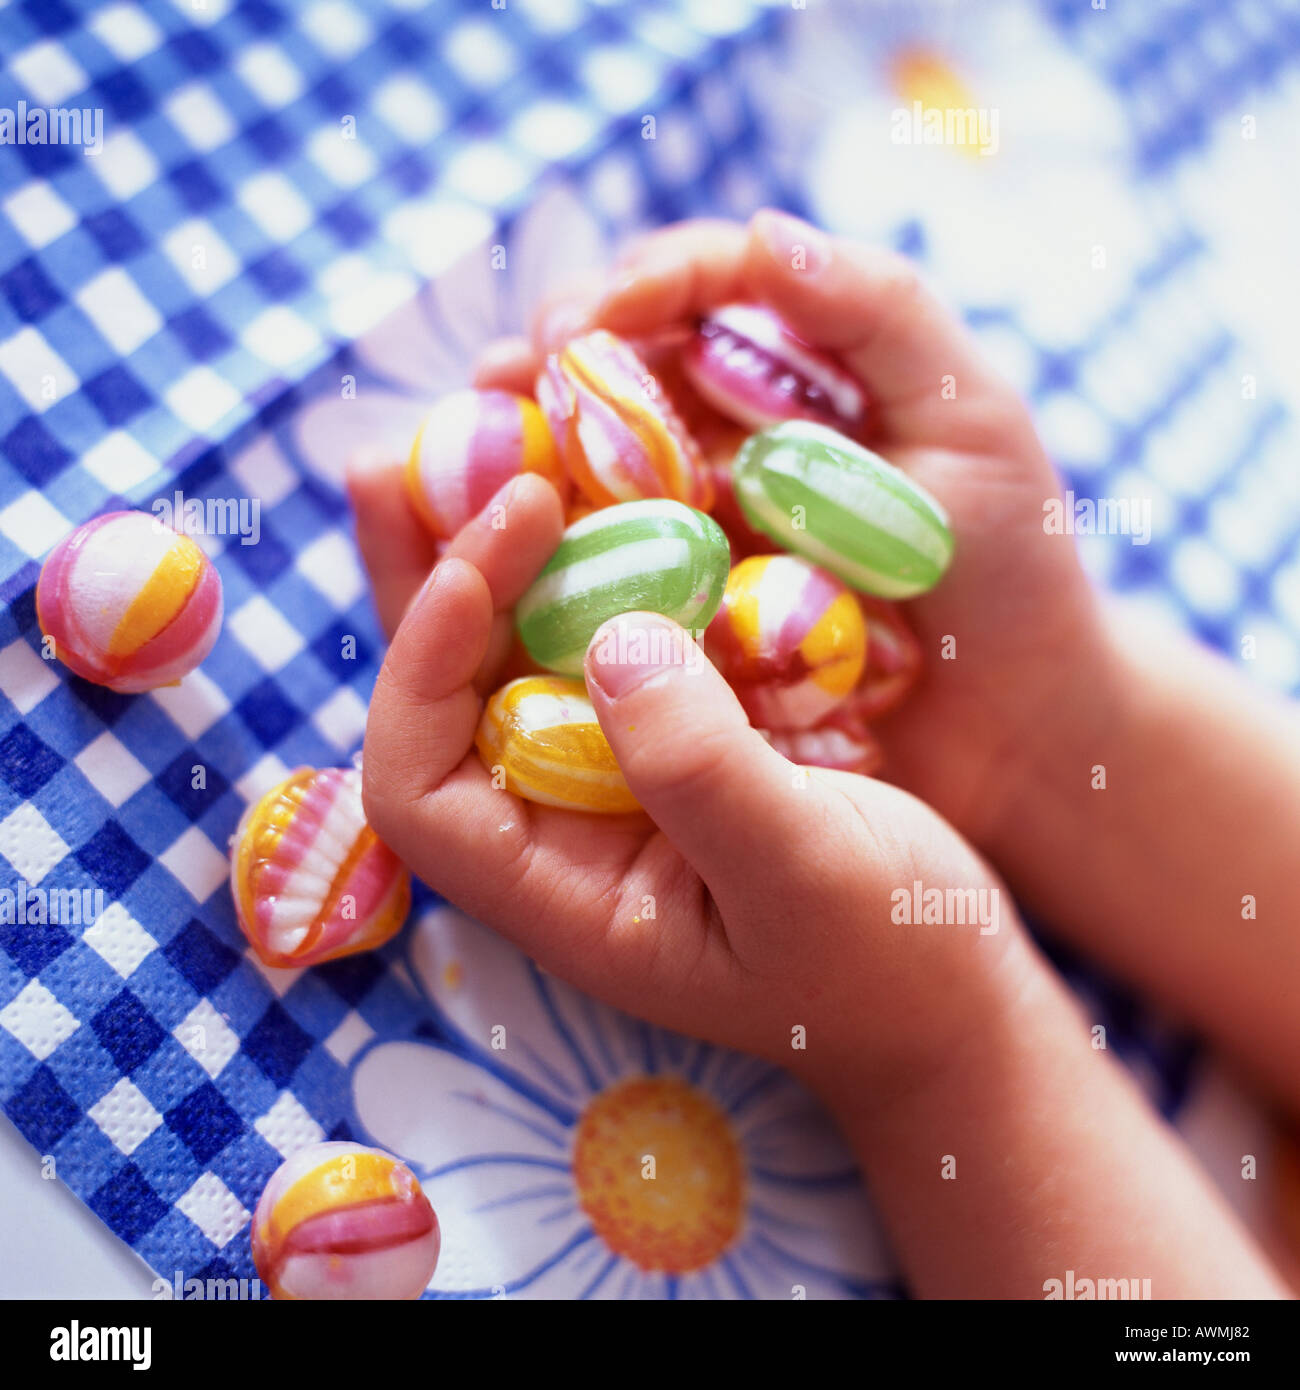 Childs Hands Holding Candy Close Up Stock Photo Alamy